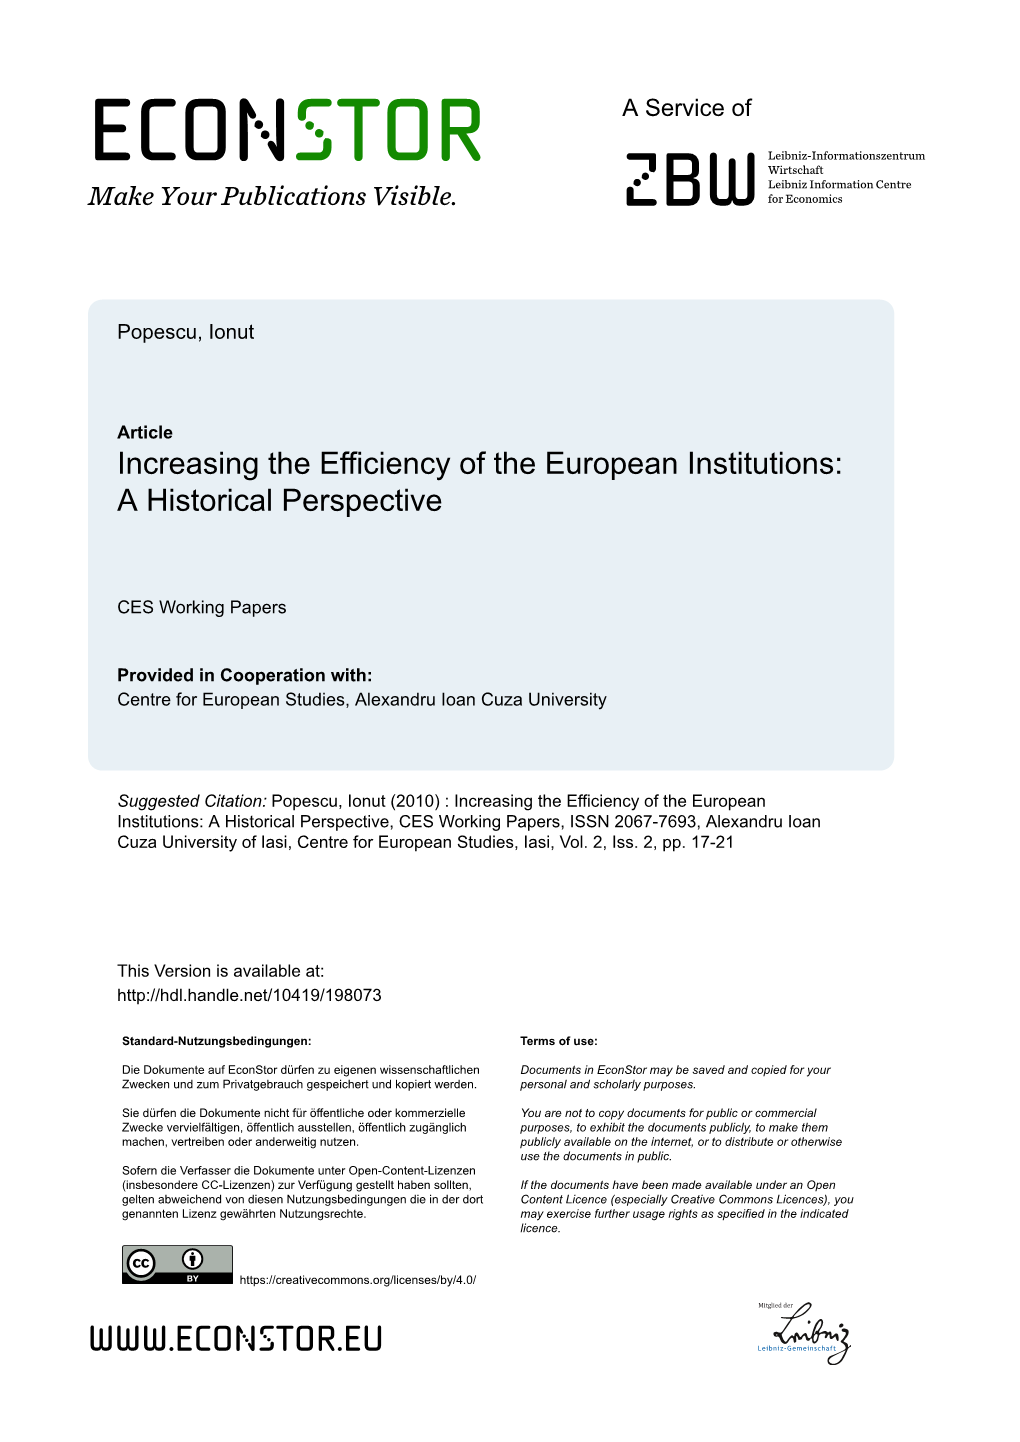 Increasing Thr Efficiency of the European Institutions: a Historical Perspective